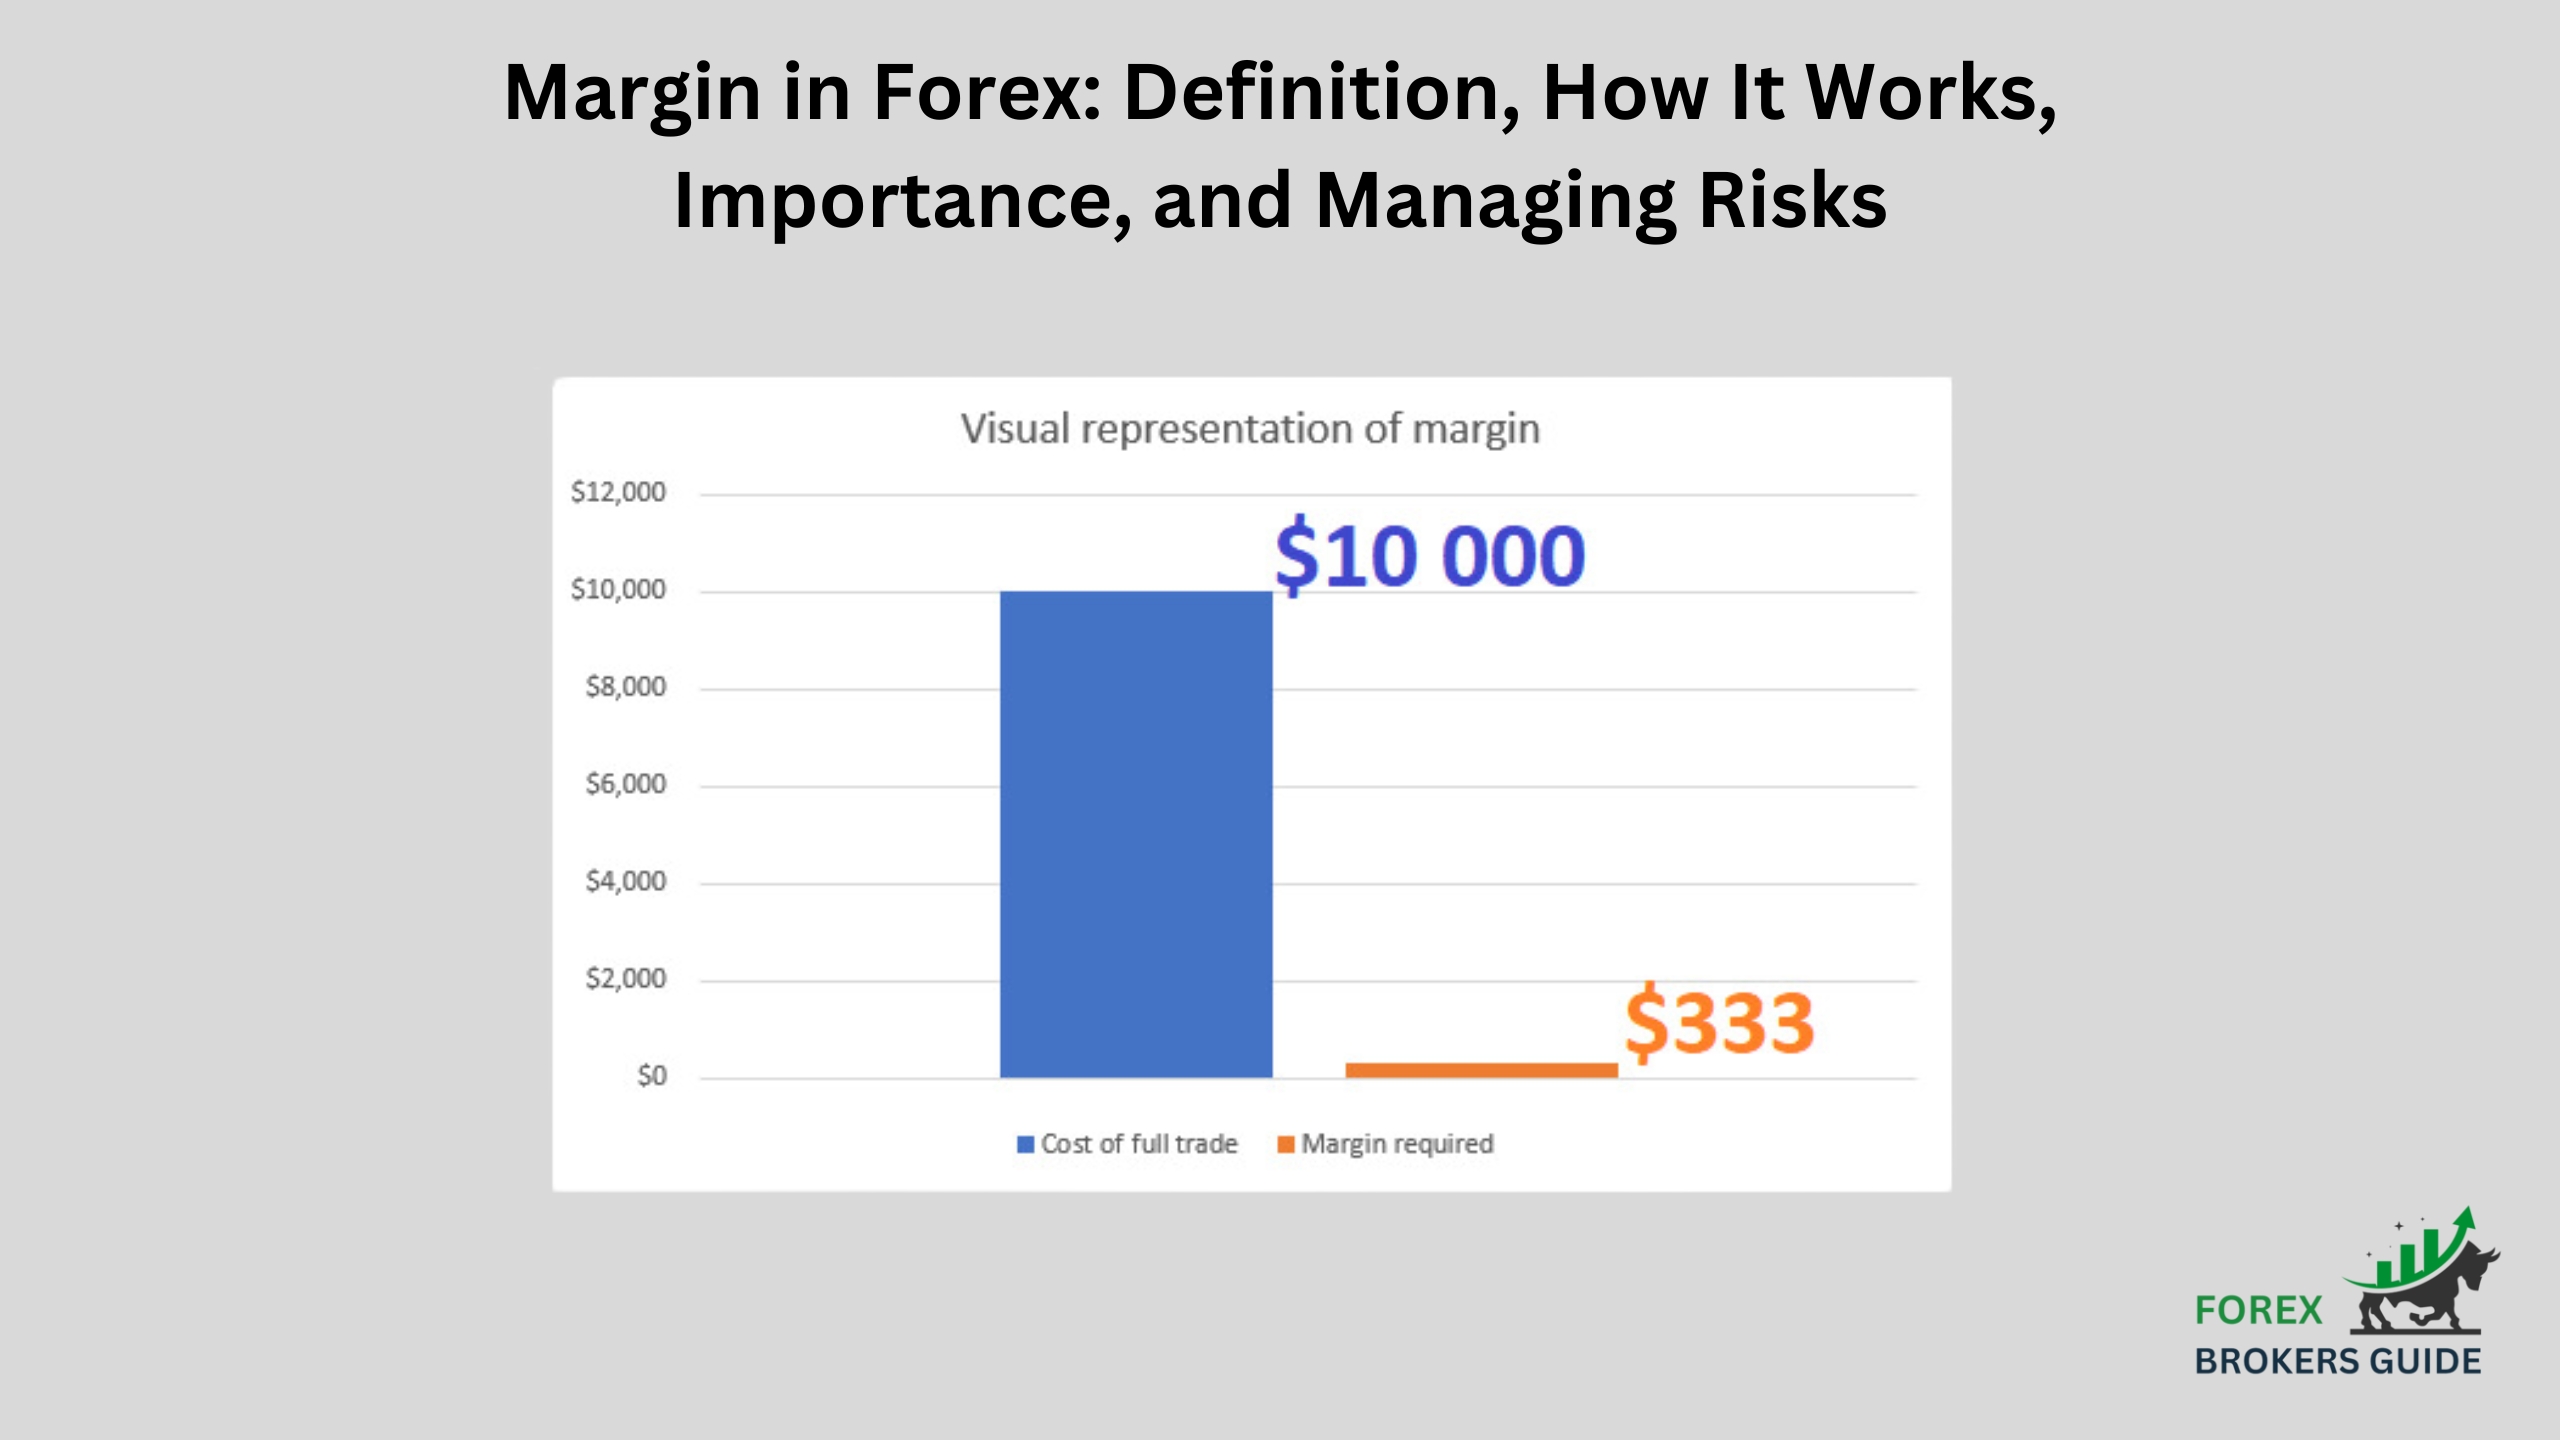 Margin in Forex: Definition, How It Works, Importance, and Managing Risks